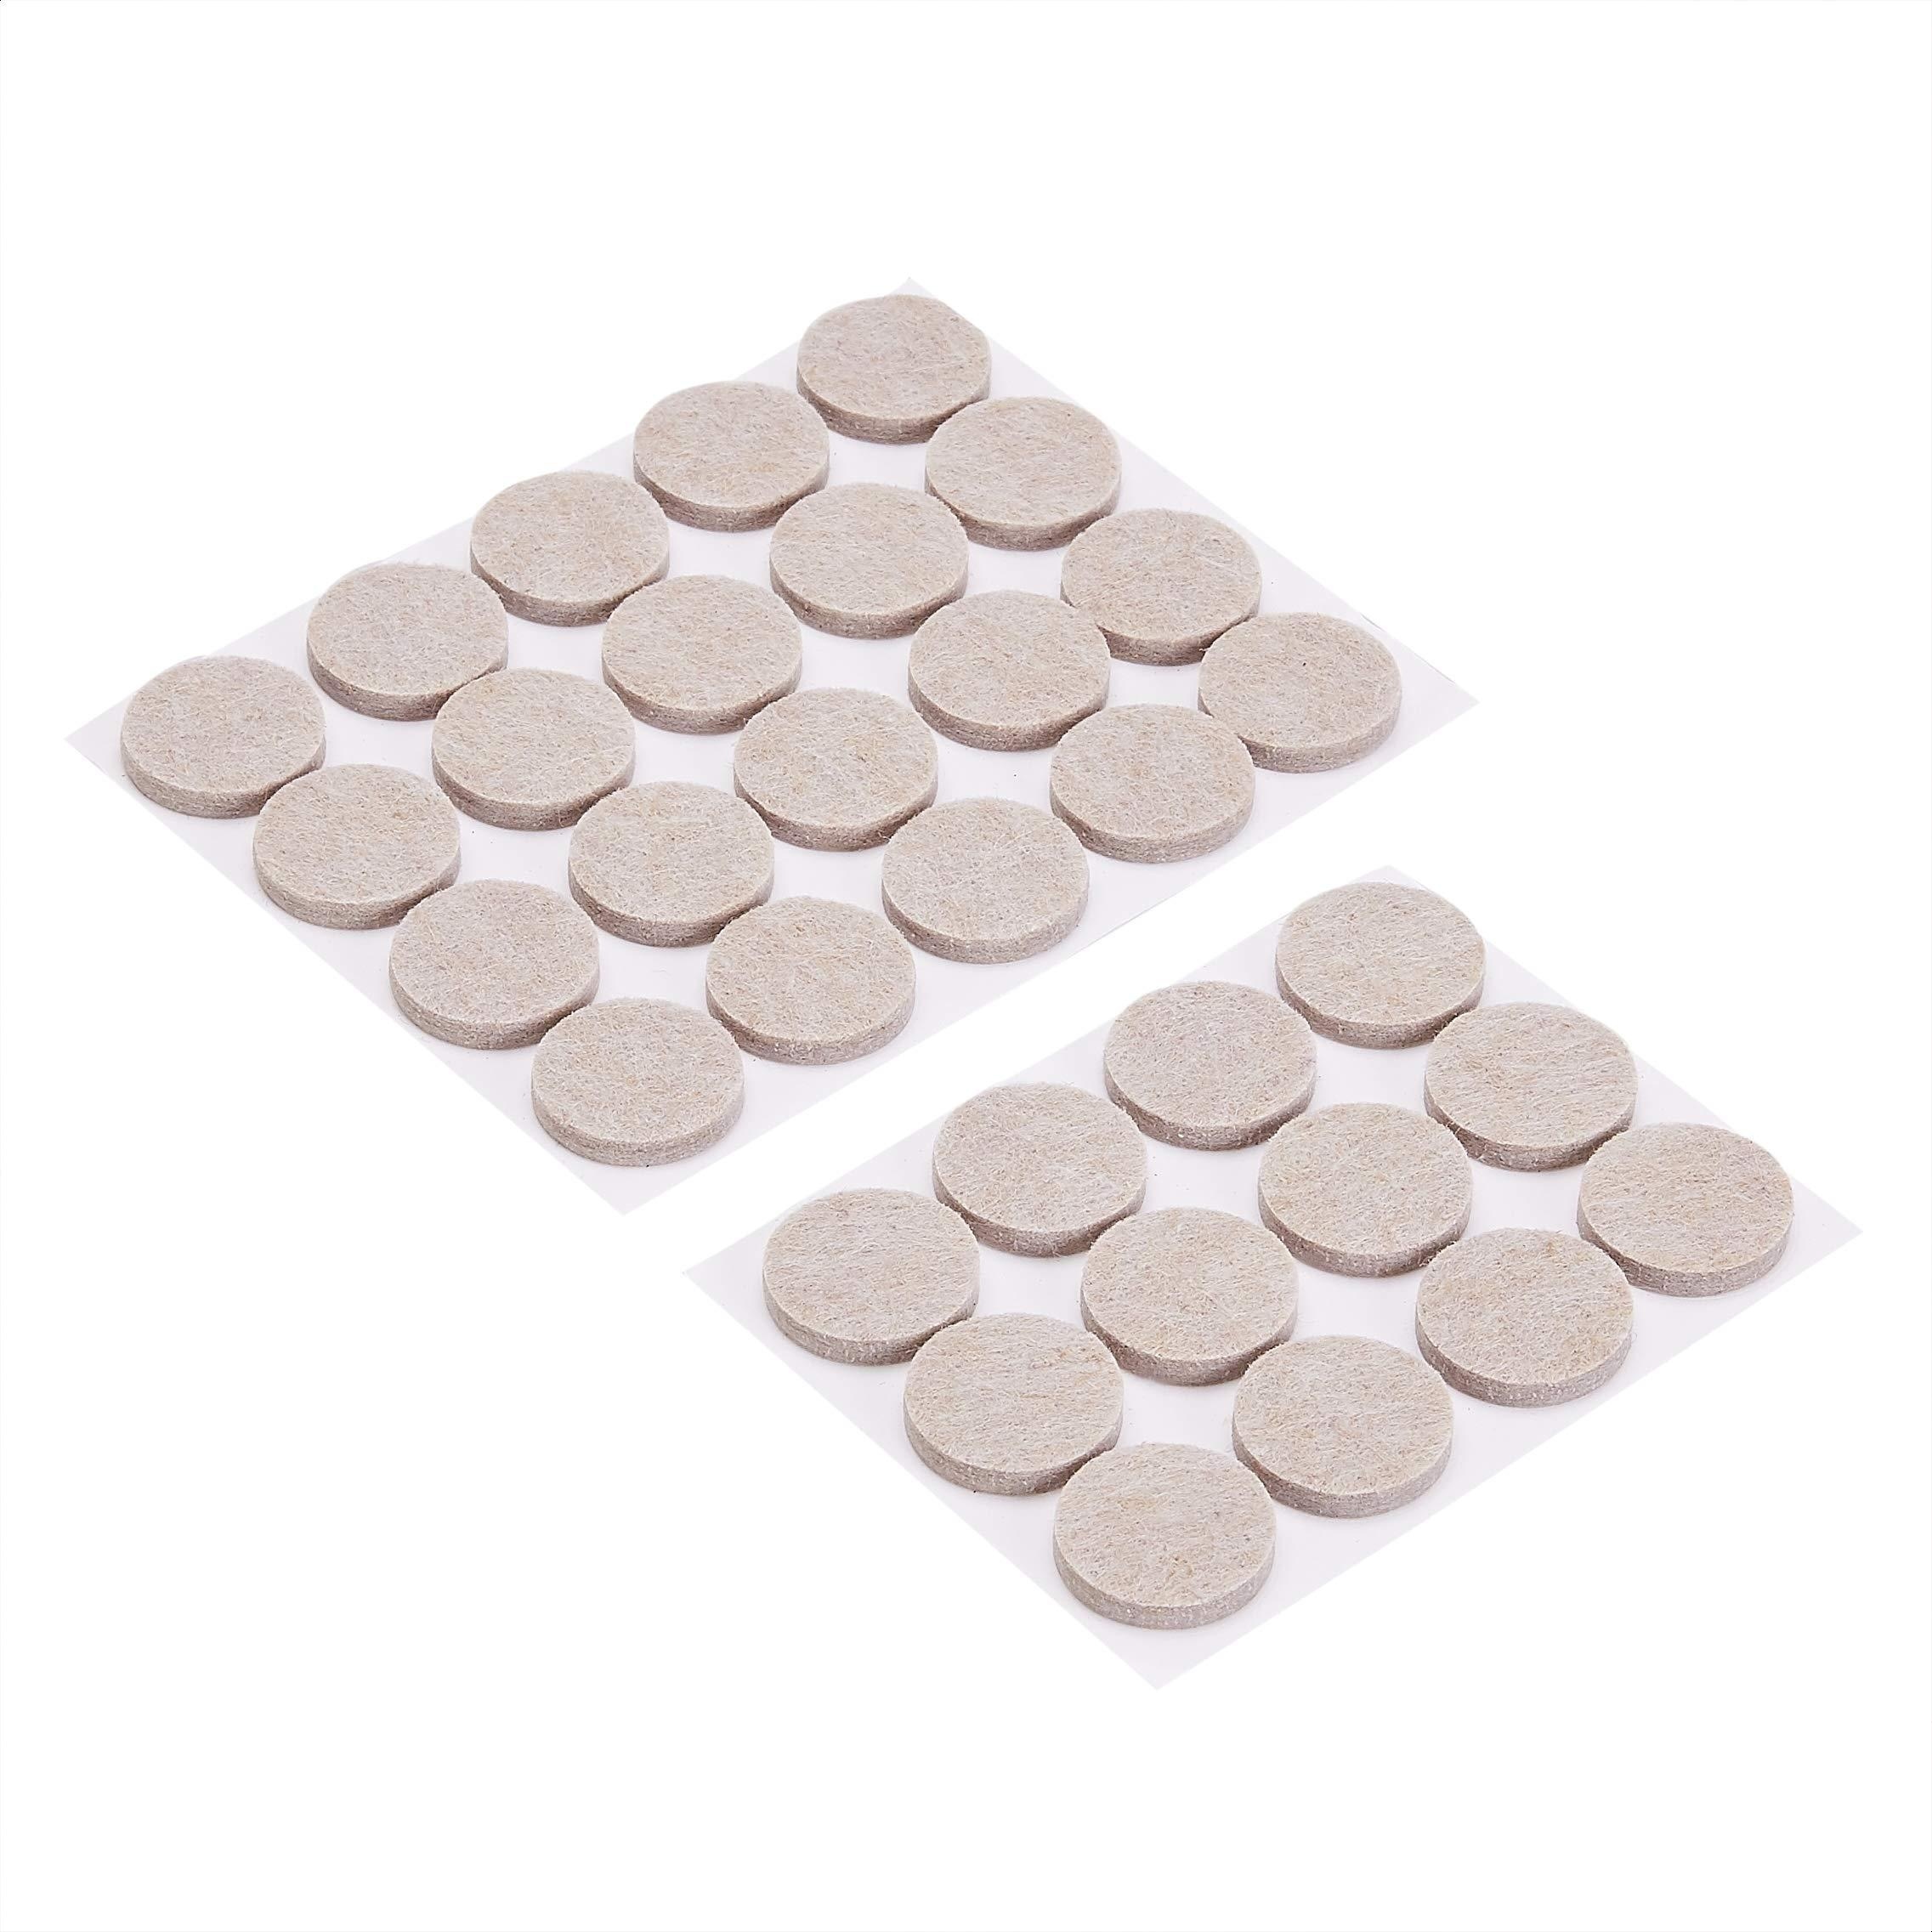 Felt Cabinet Door Bumpers-Small Felt Pads for Cabinet Doors, Cabinet  Bumpers Felt, 3/8 Diameter 200PCS, 3mm Thick Self Adhesive Brown 